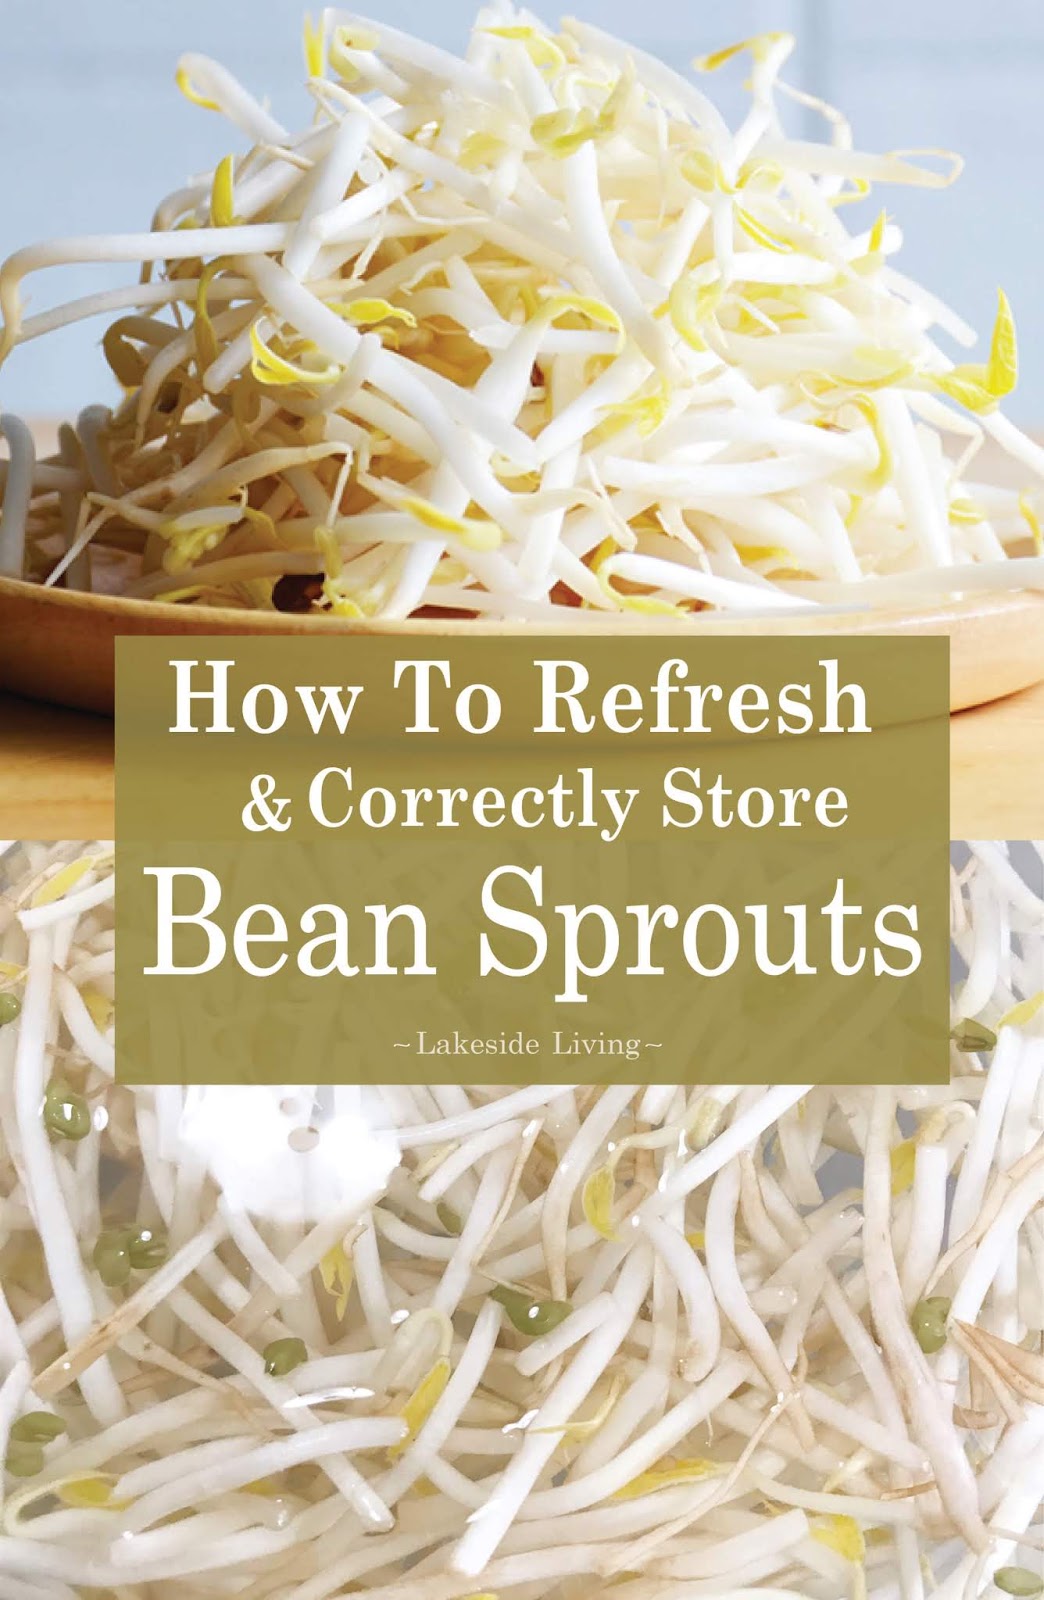 How To Refresh and Store Bean Sprouts